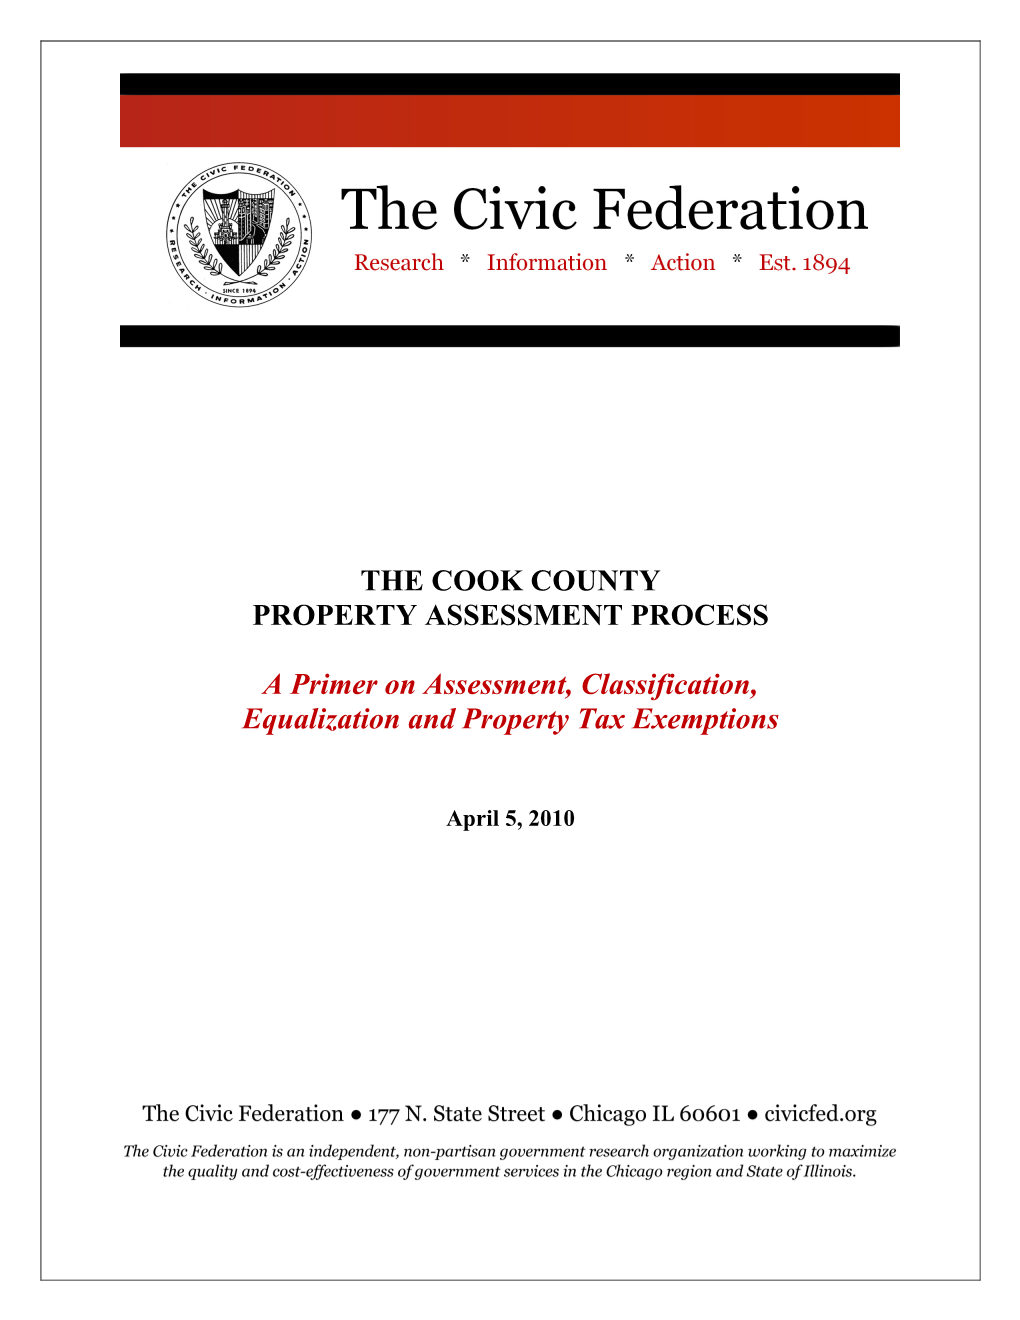 Primer on the Cook County Property Tax Assessment Process